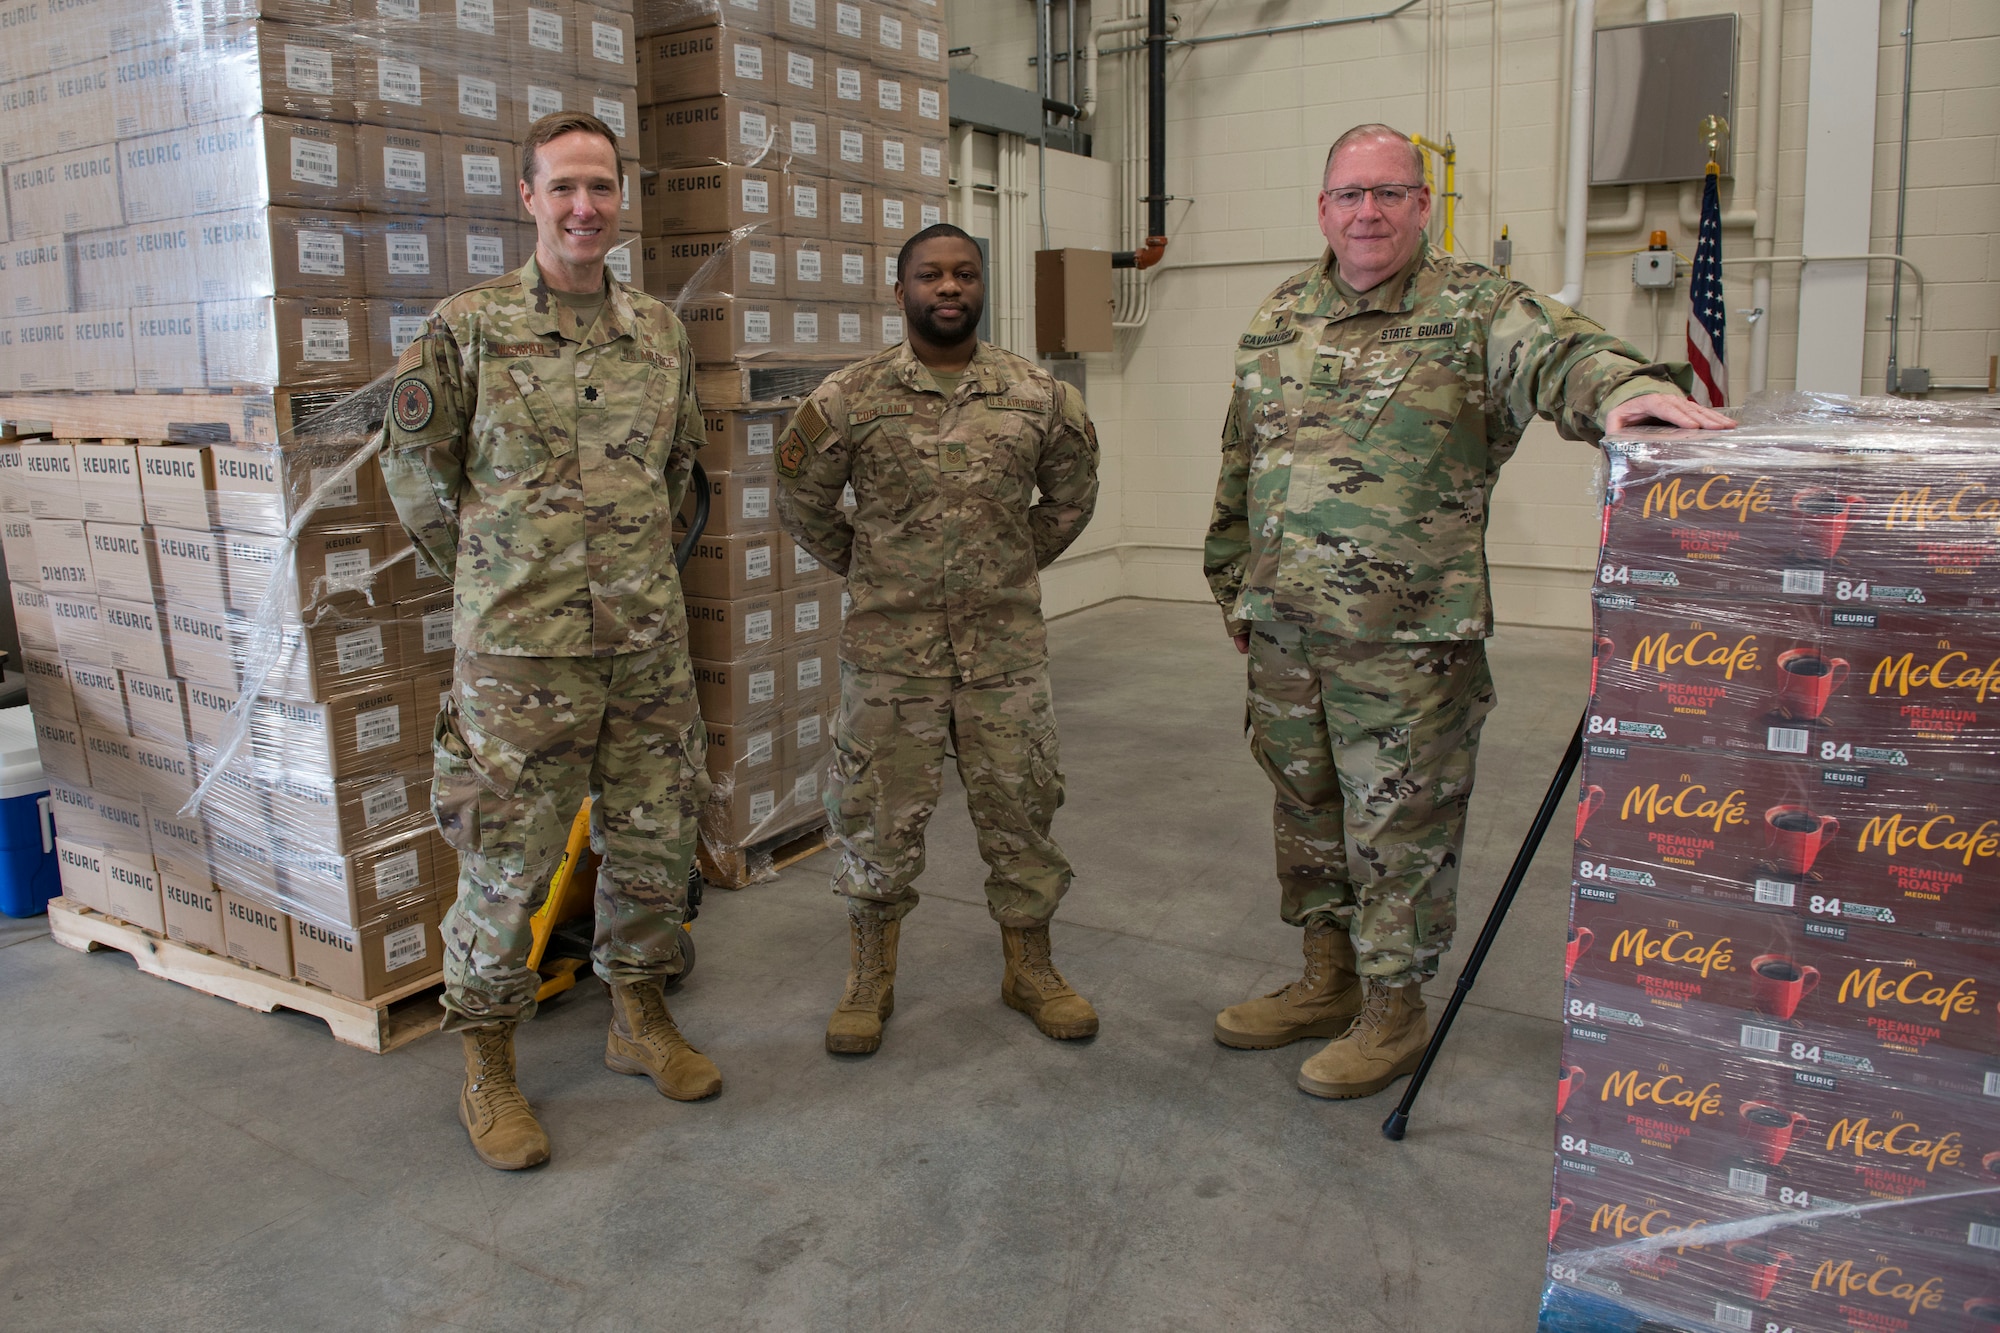 Retired Army Col. Kevin Cavanaugh, Connecticut State Militia Chaplain and former Army Chaplain,  accepts a donation of more than 1,400 pounds of coffee, June 14, 2021 at Bradley Air National Guard Base, Connecticut. The coffee was donated by Holy Joe's Cafe, a 501(c)(3) non-profit organization. (U.S. Air National Guard photo by Master Sgt. Tamara R. Dabney)